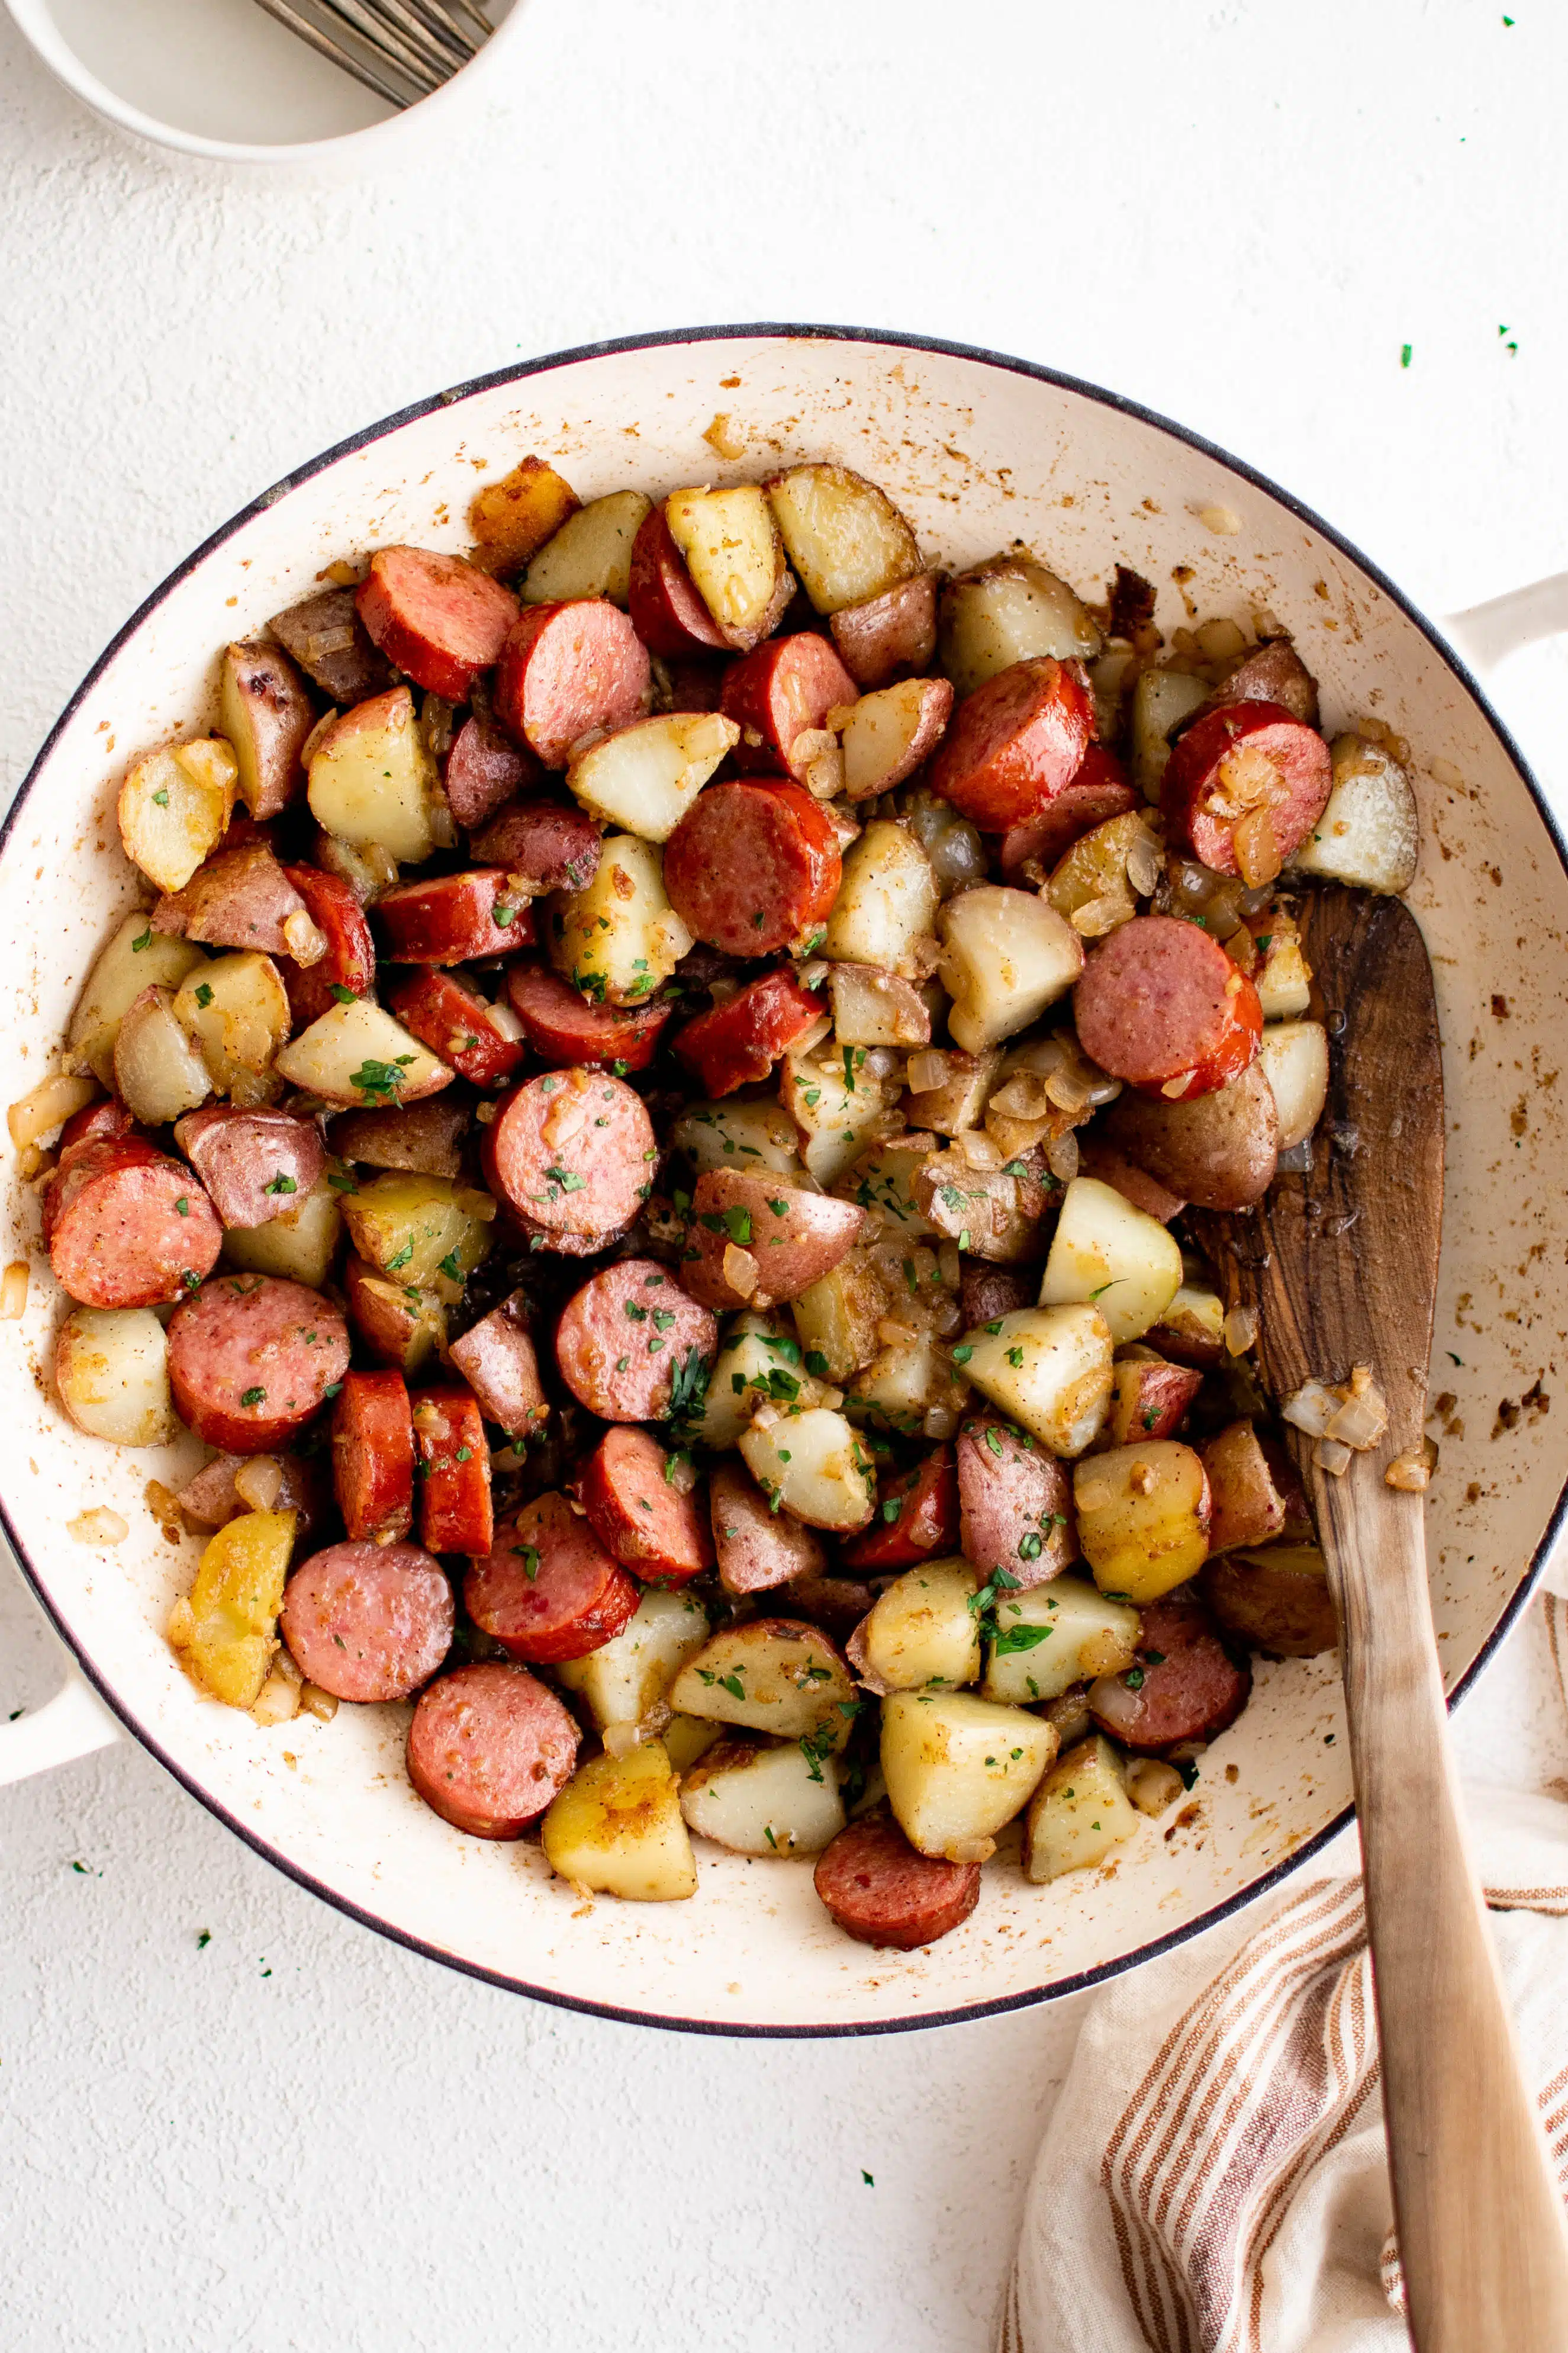 Prepared kielbasa and potatoes in a large pan garnished with chopped parsley.